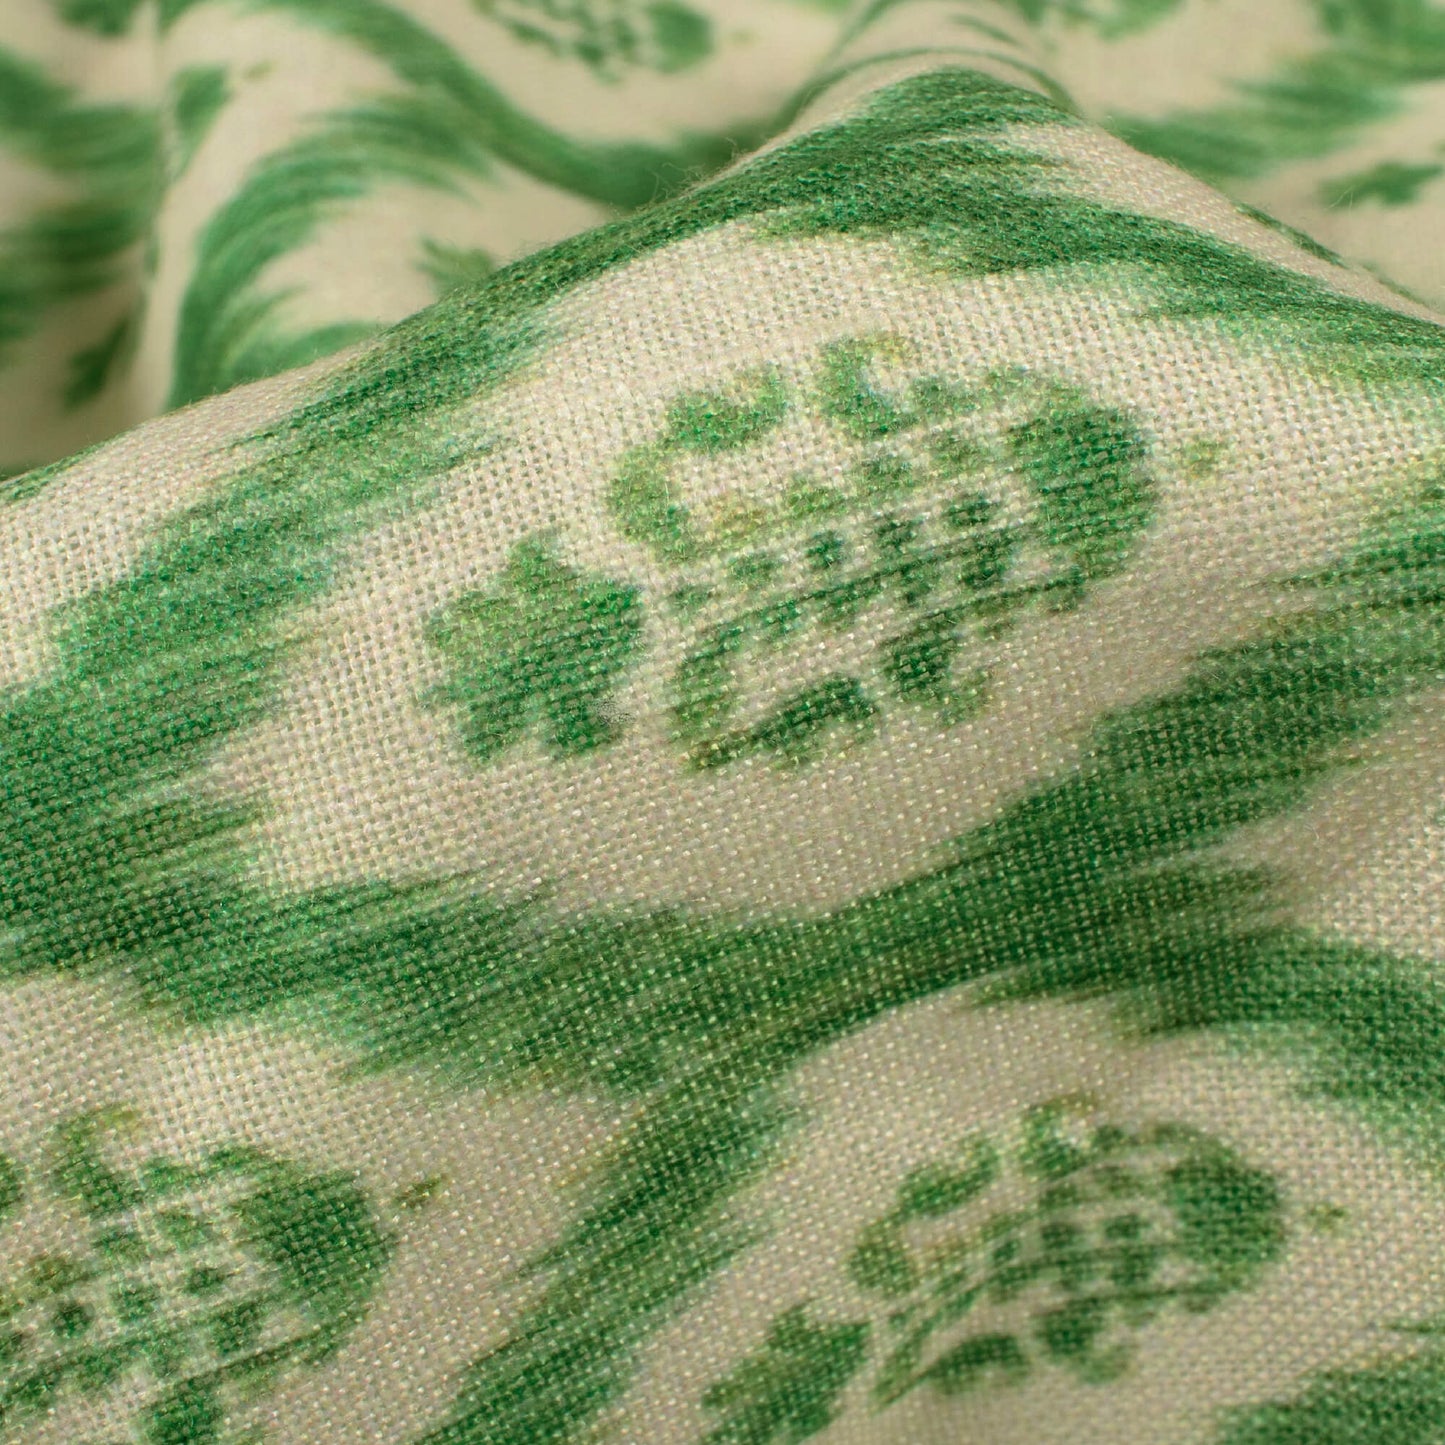 Basil Green And Off White Floral Pattern Digital Print Linen Textured Fabric (Width 56 Inches)